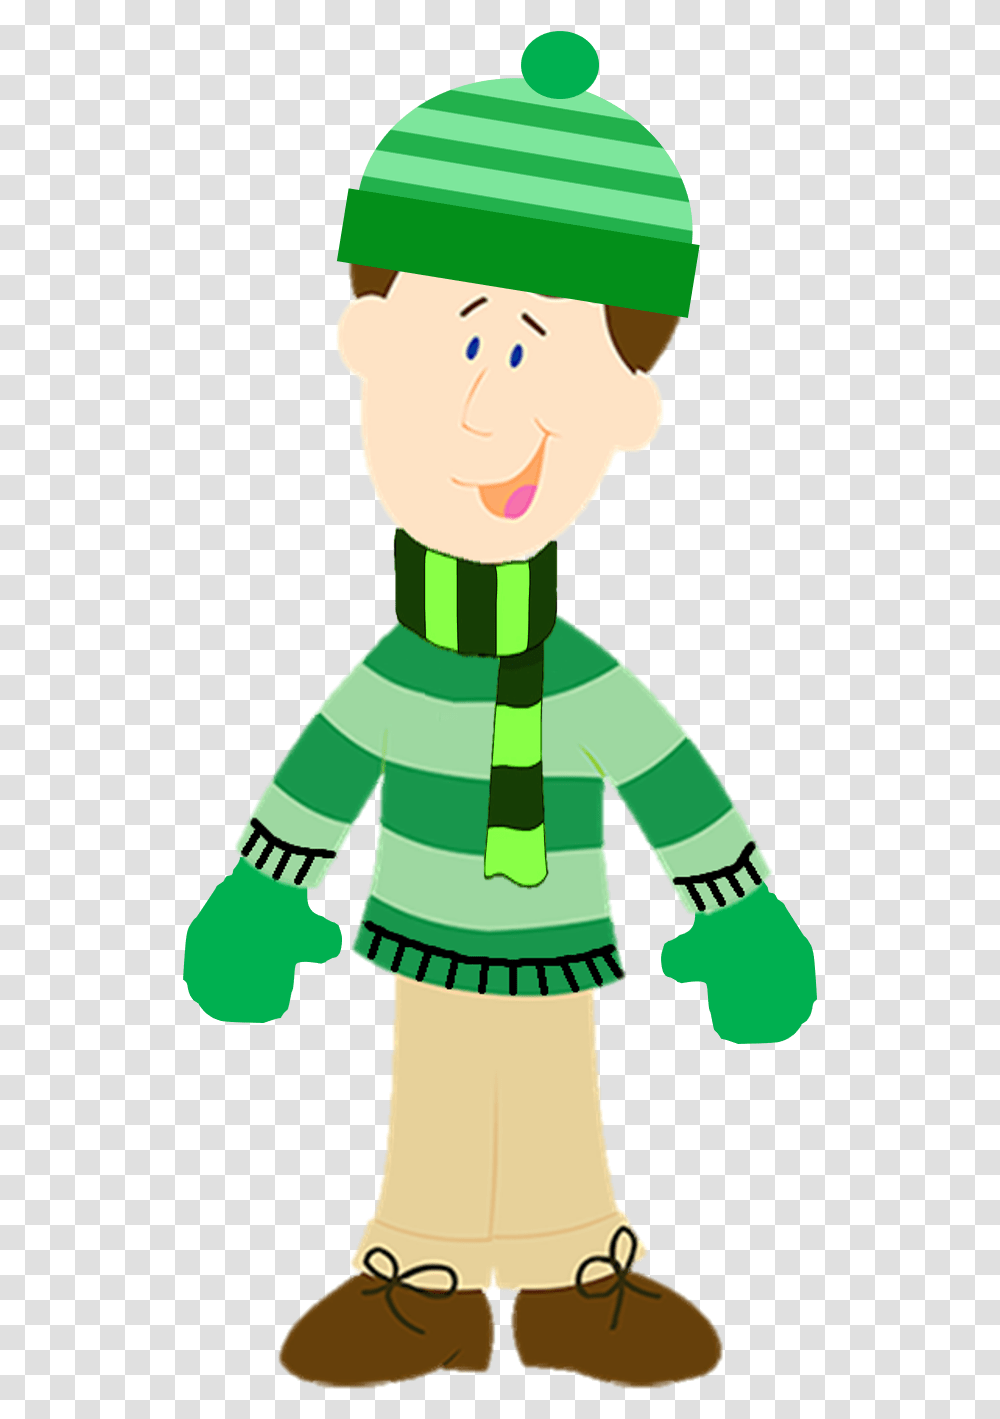 Steve With His Sweater 2 Blue's Clues Blues Clues Steve Cartoon, Elf, Green, Costume, Person Transparent Png